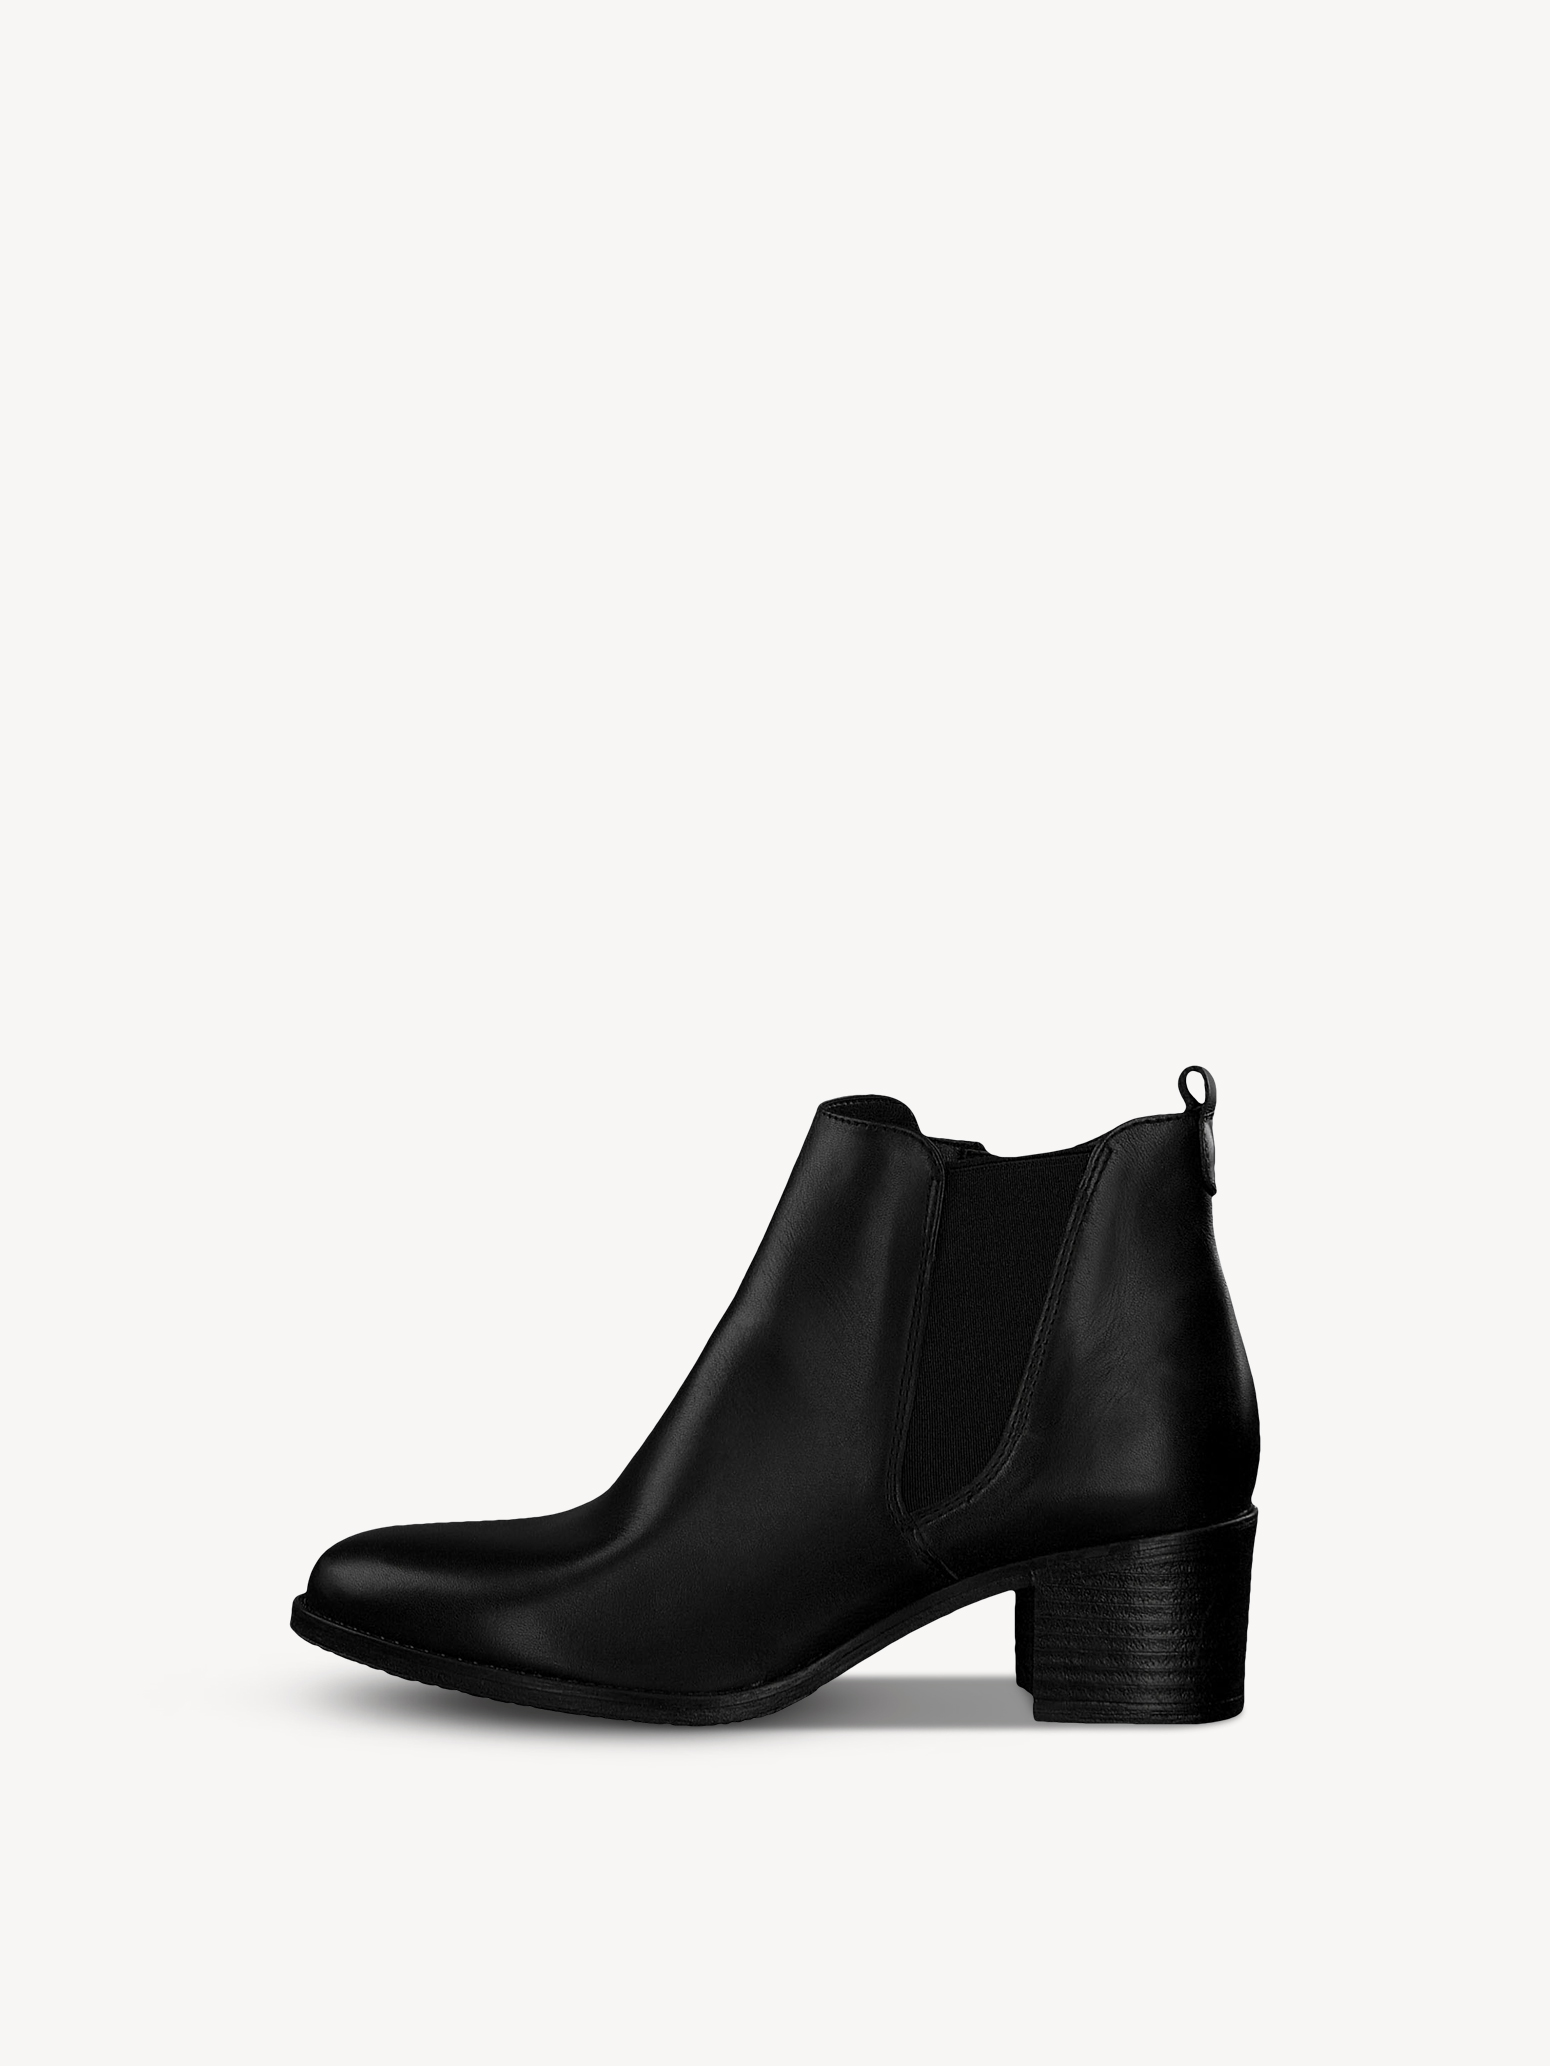 Leather Chelsea boot 1-1-25043-23: Buy 